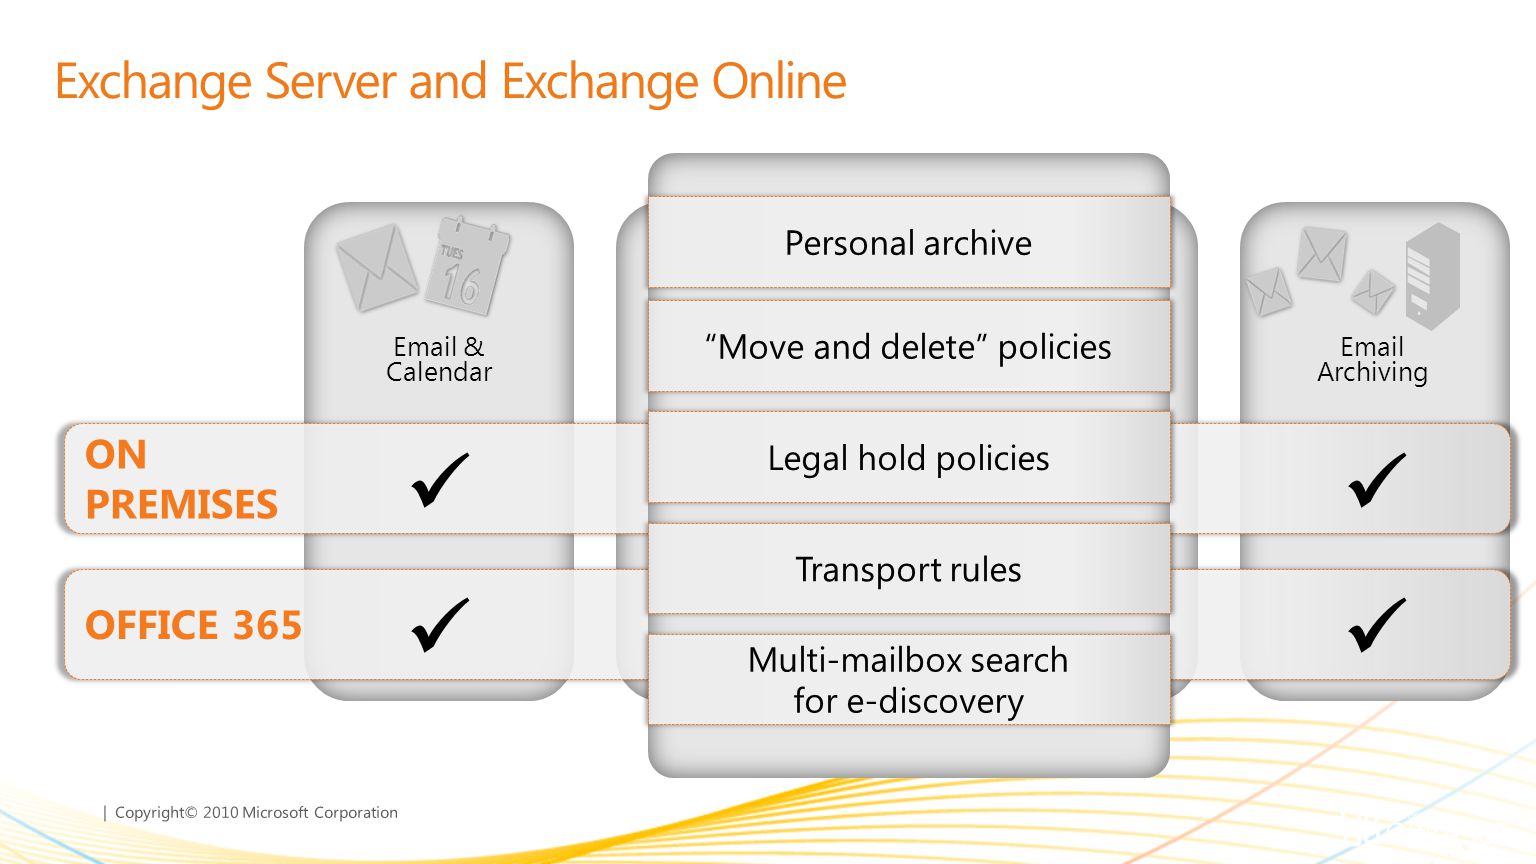 | Copyright© 2010 Microsoft Corporation Exchange Server and Exchange Online Mobile Collaboration  & Calendar Voic in Your Inbox  Archiving Personal archive Move and delete policies Legal hold policies Transport rules Multi-mailbox search for e-discovery